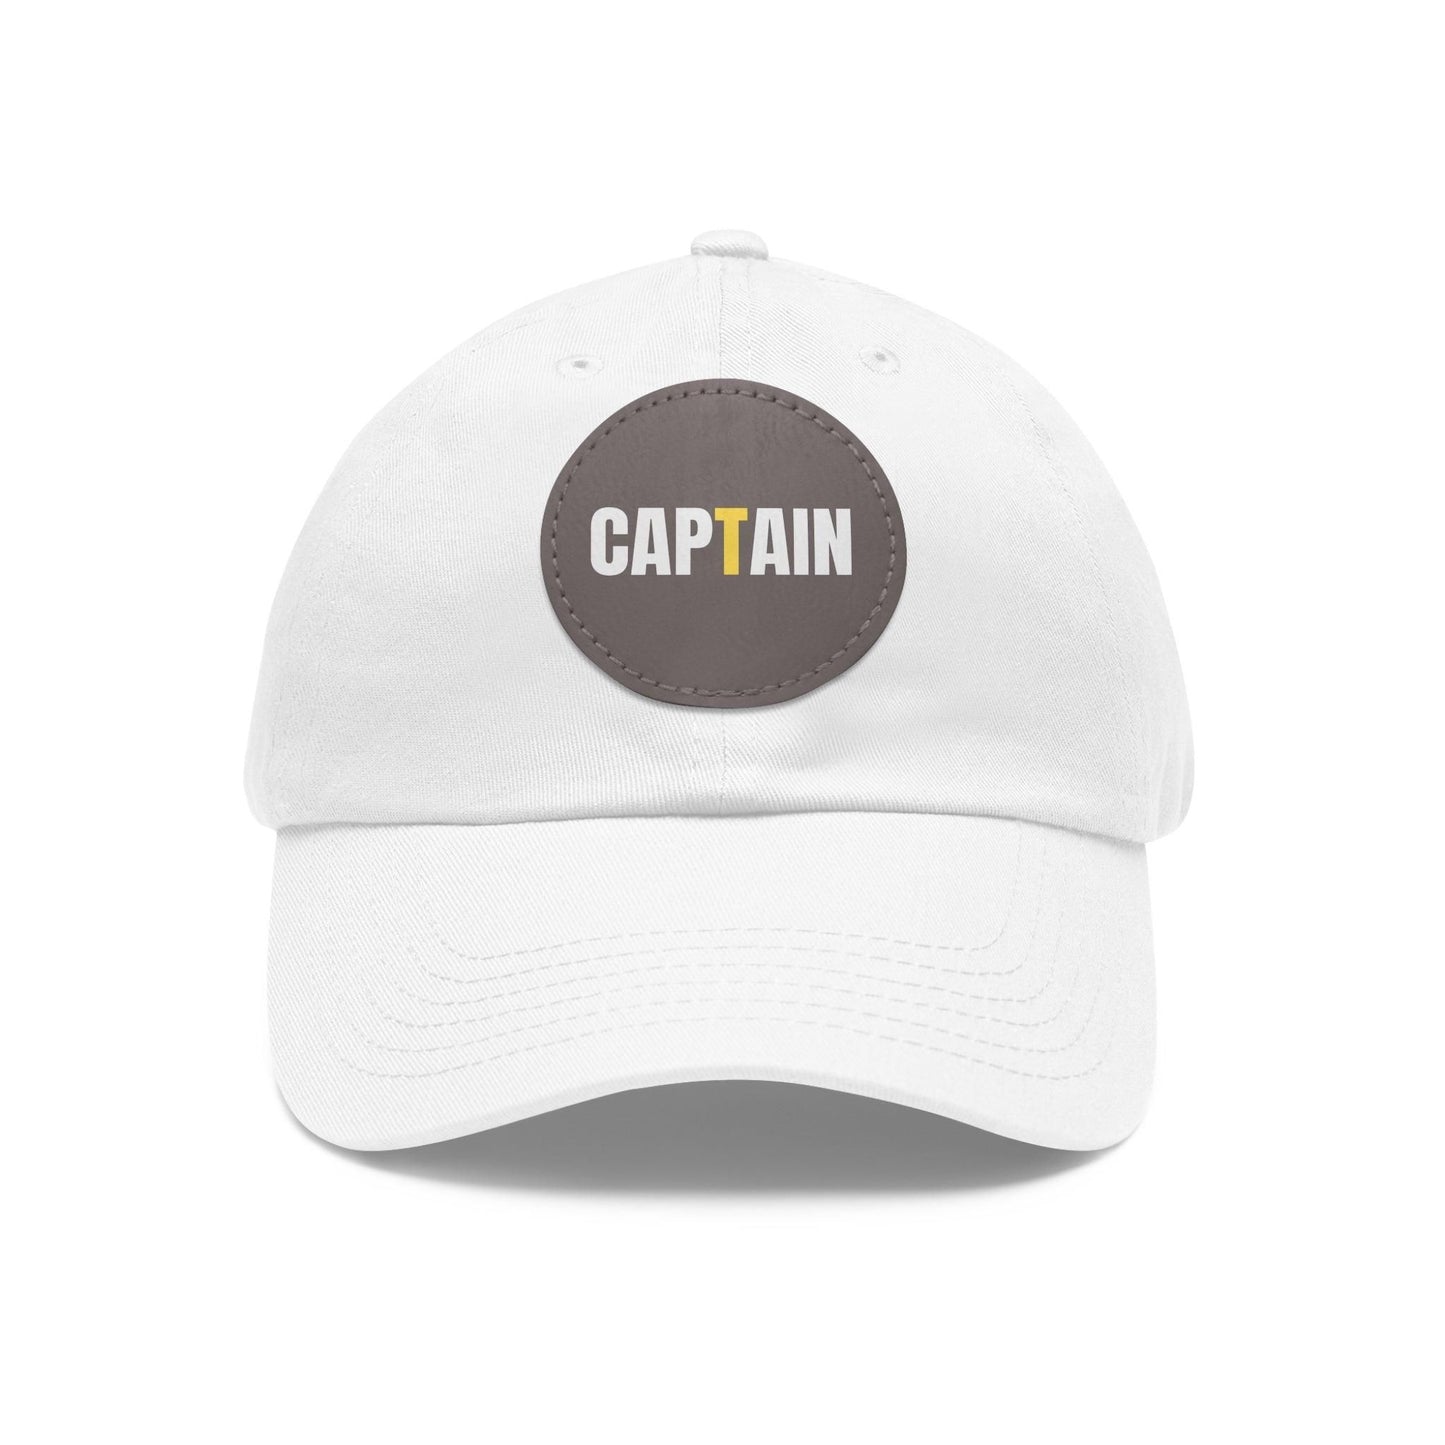 Captain Baseball Hat with Leather Patch Cap White / Grey patch Circle One size